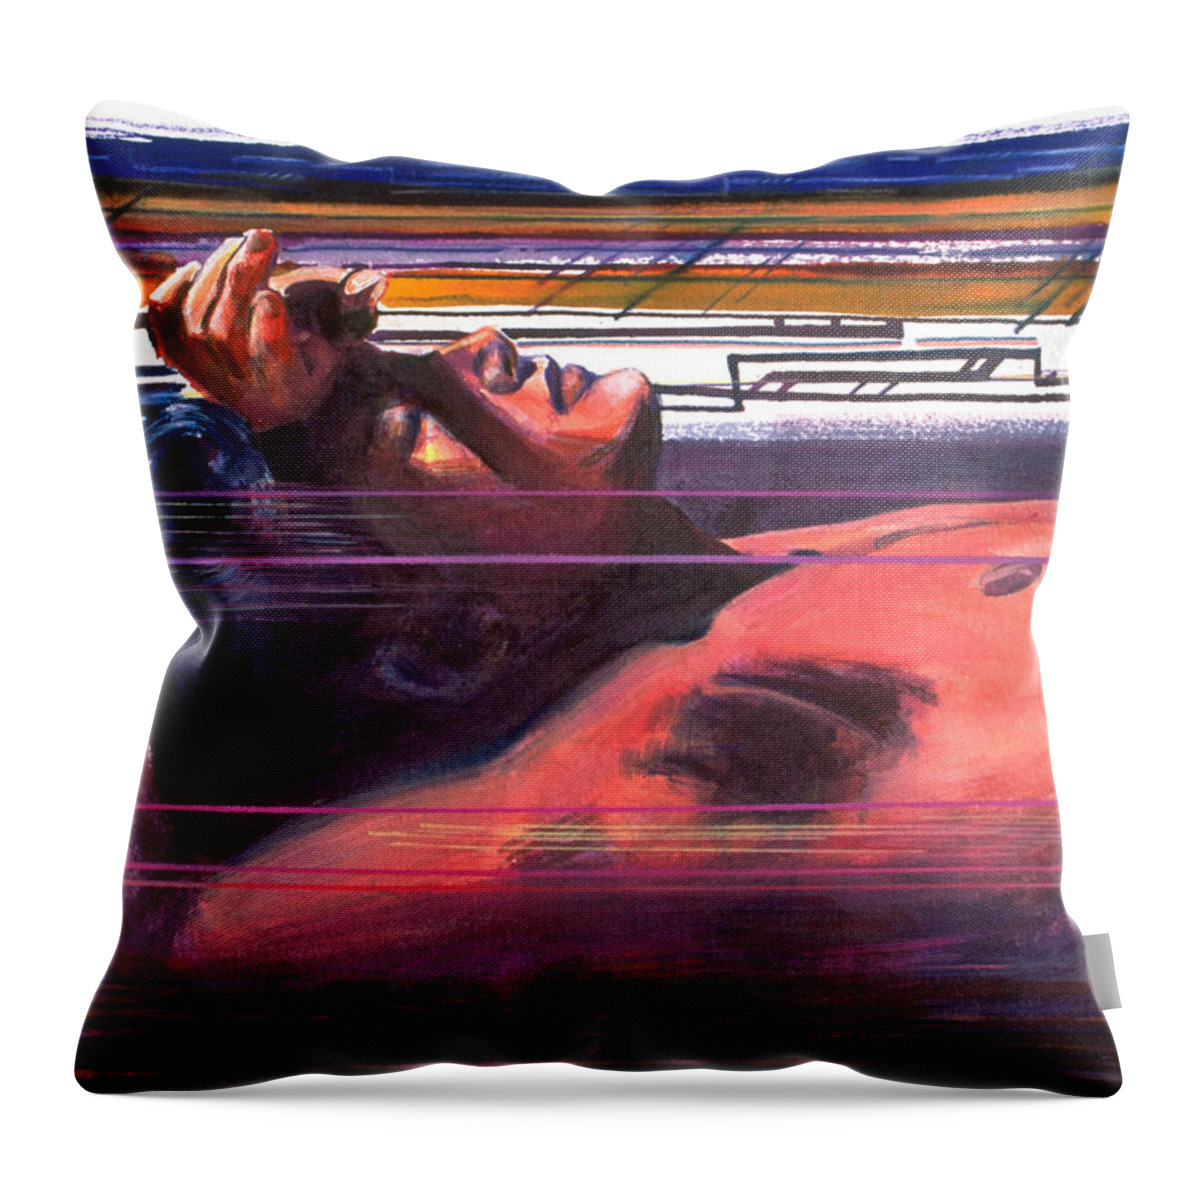 Rene Capone Throw Pillow featuring the painting Under Lying Currents by Rene Capone